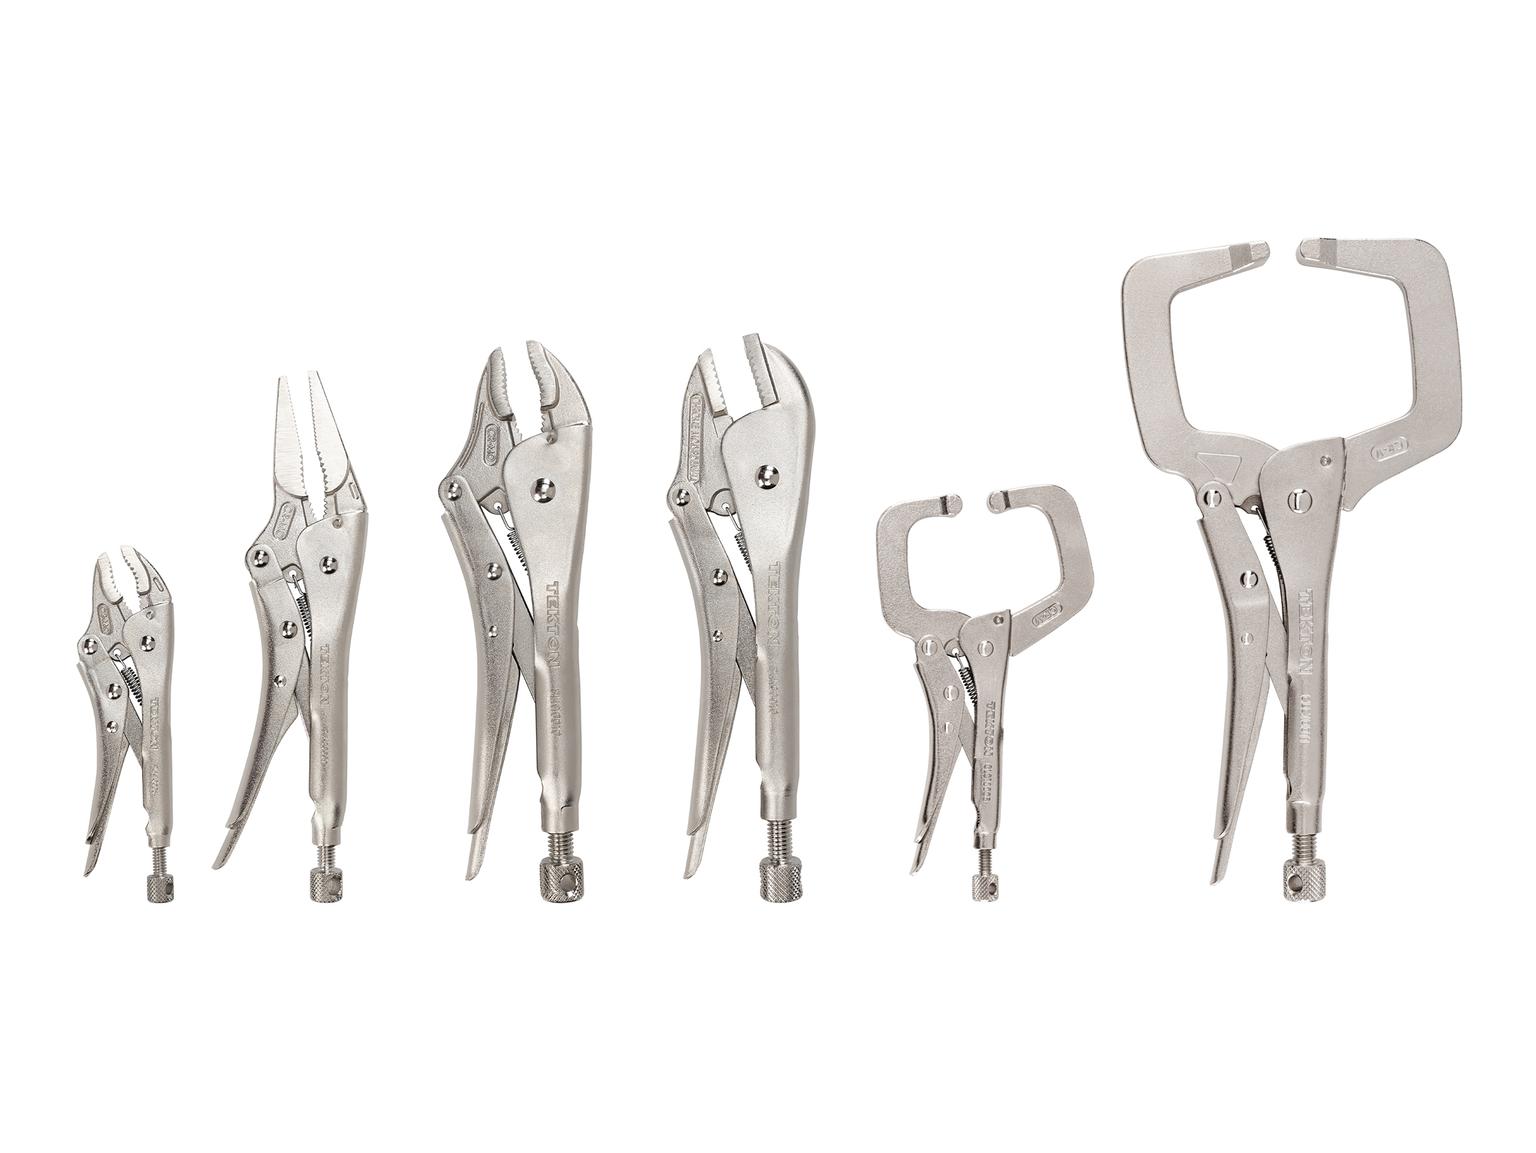 Locking Pliers and C-Clamp Set (6-Piece)